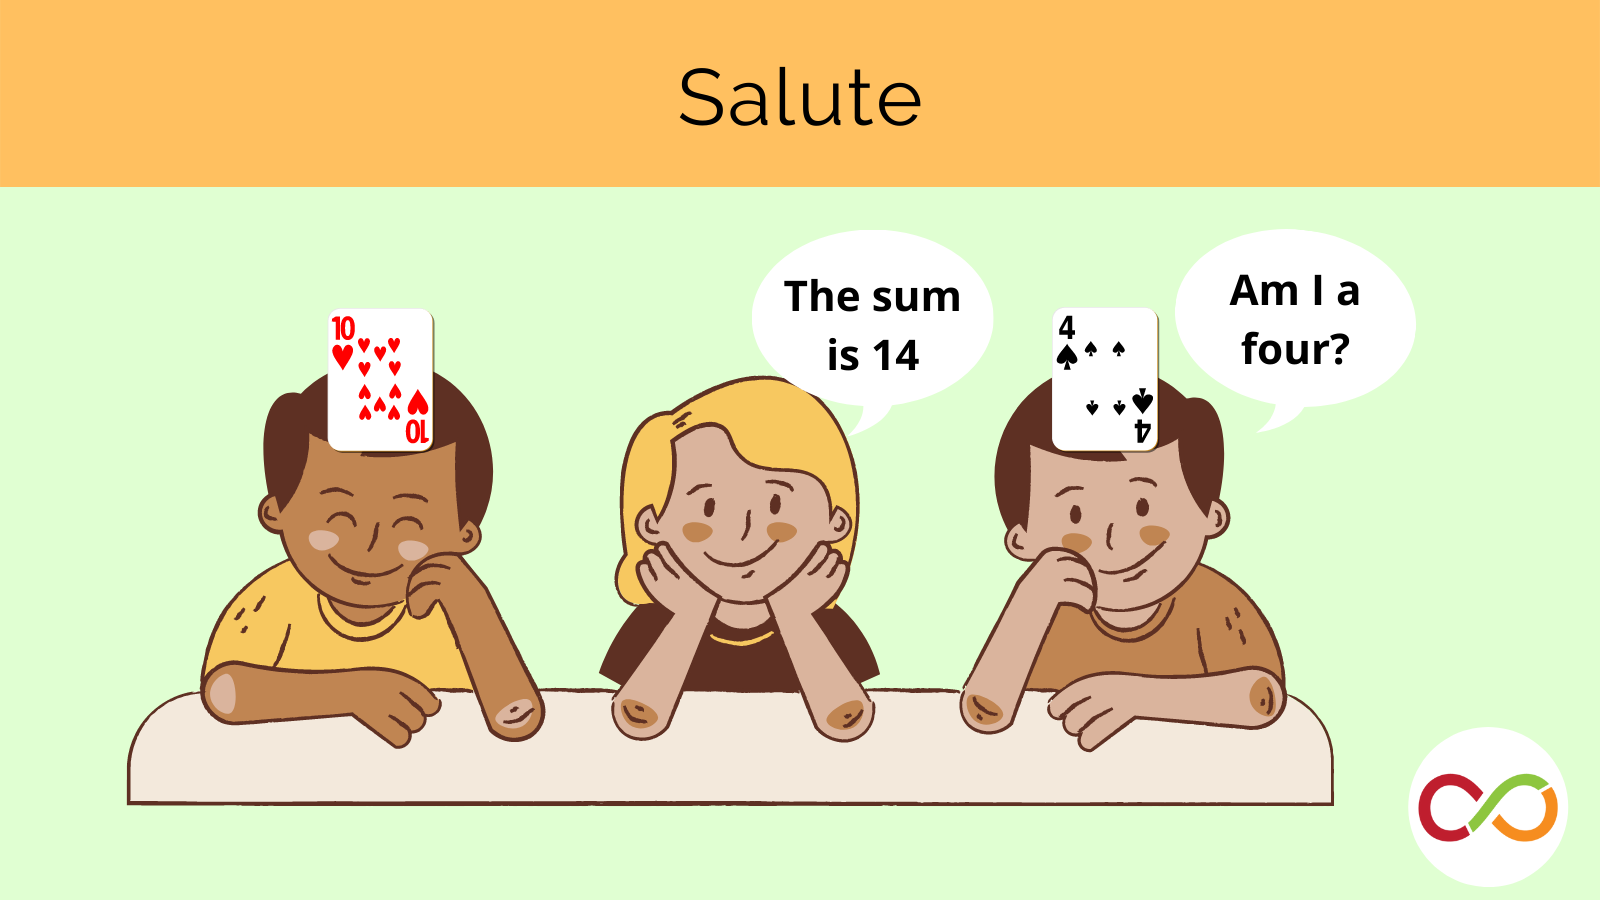 An image linking to the salute lesson